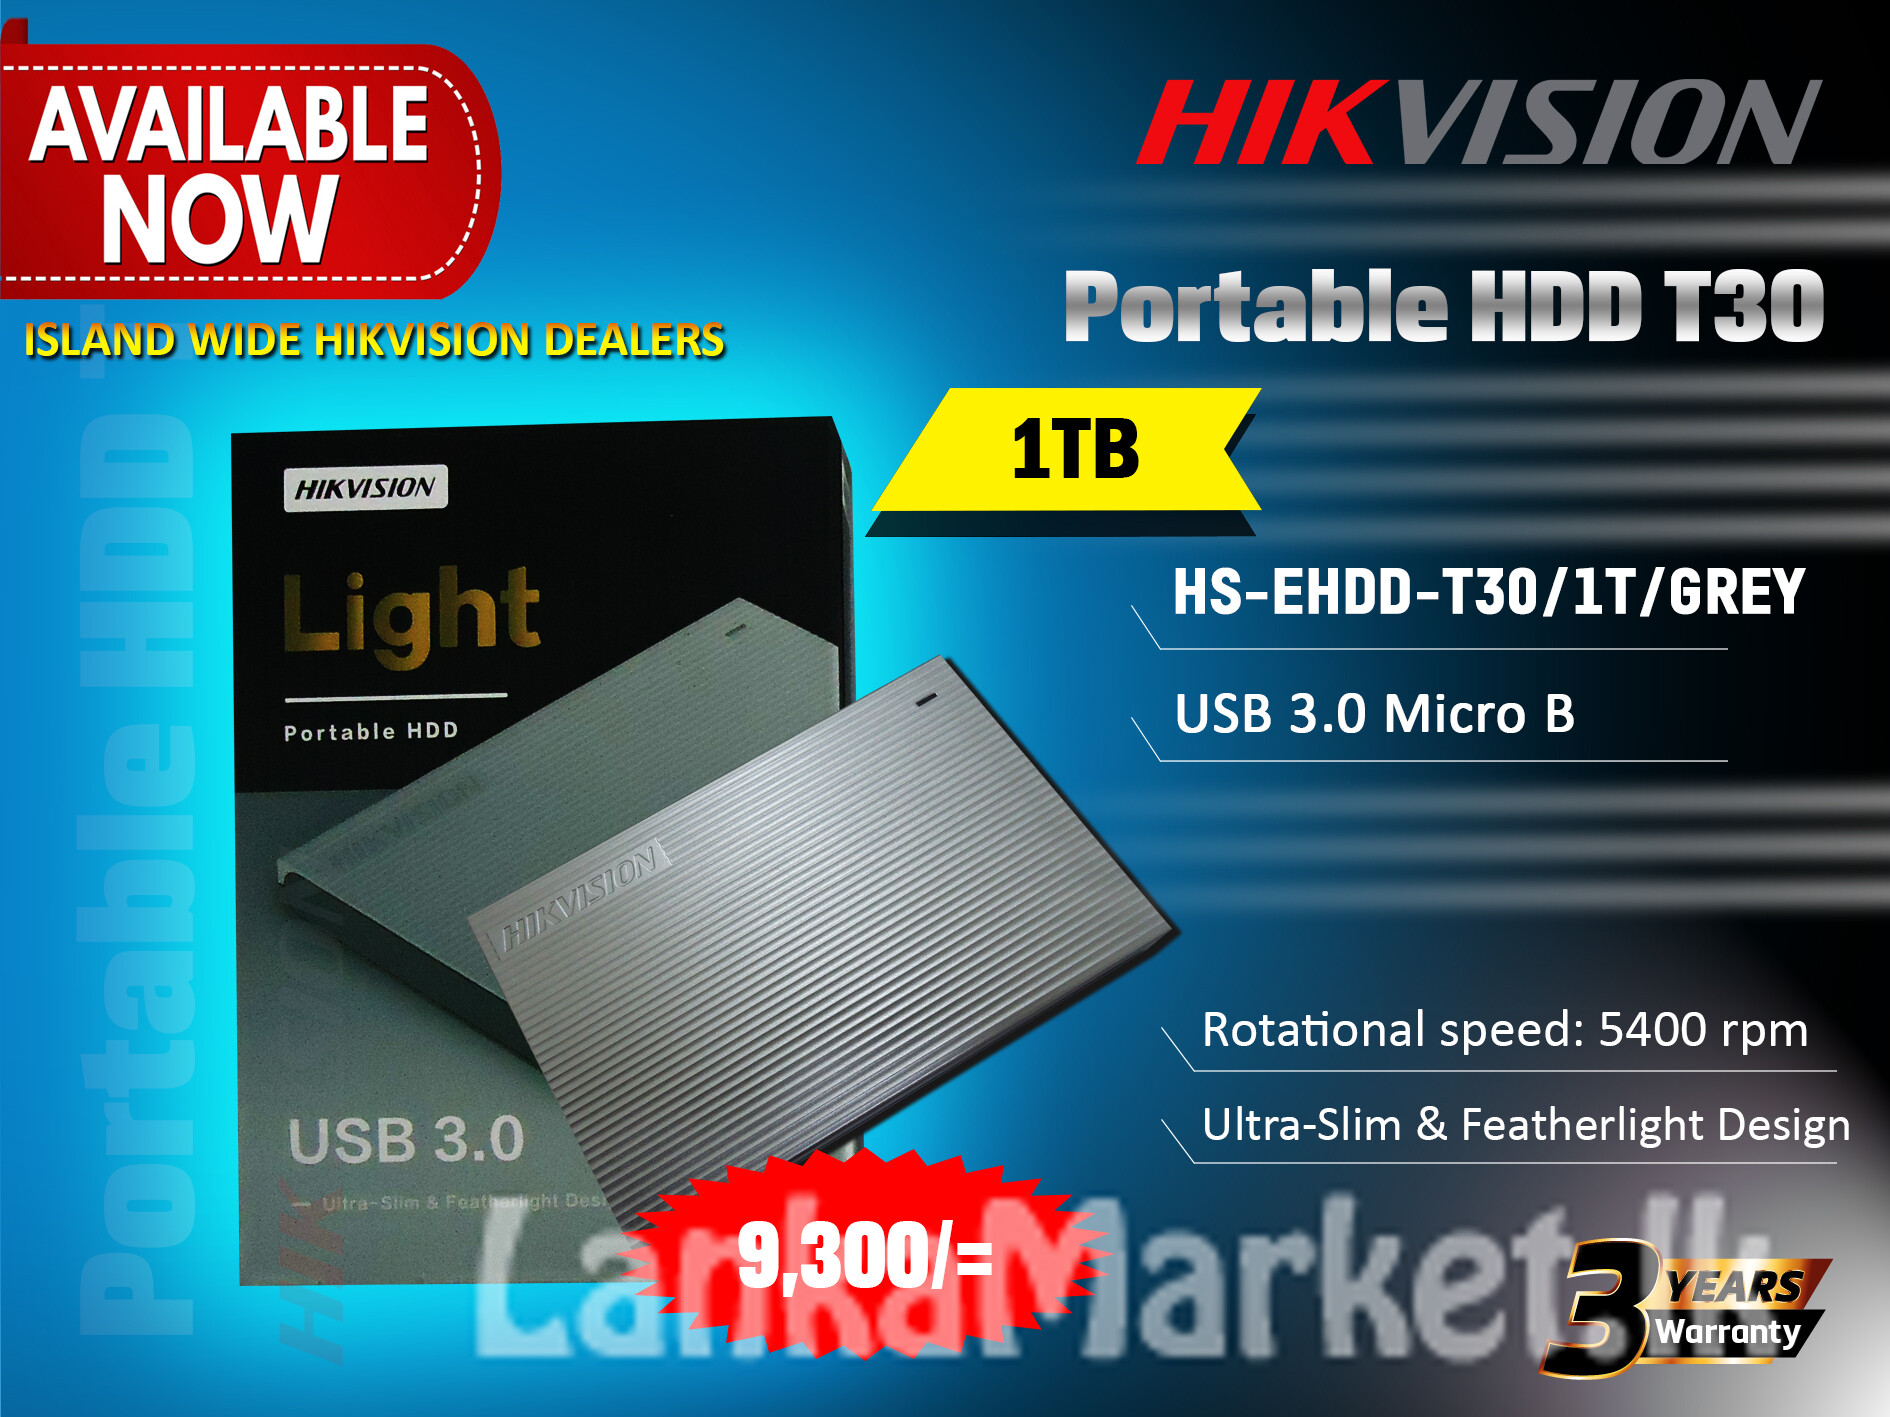 Portable HDD T30